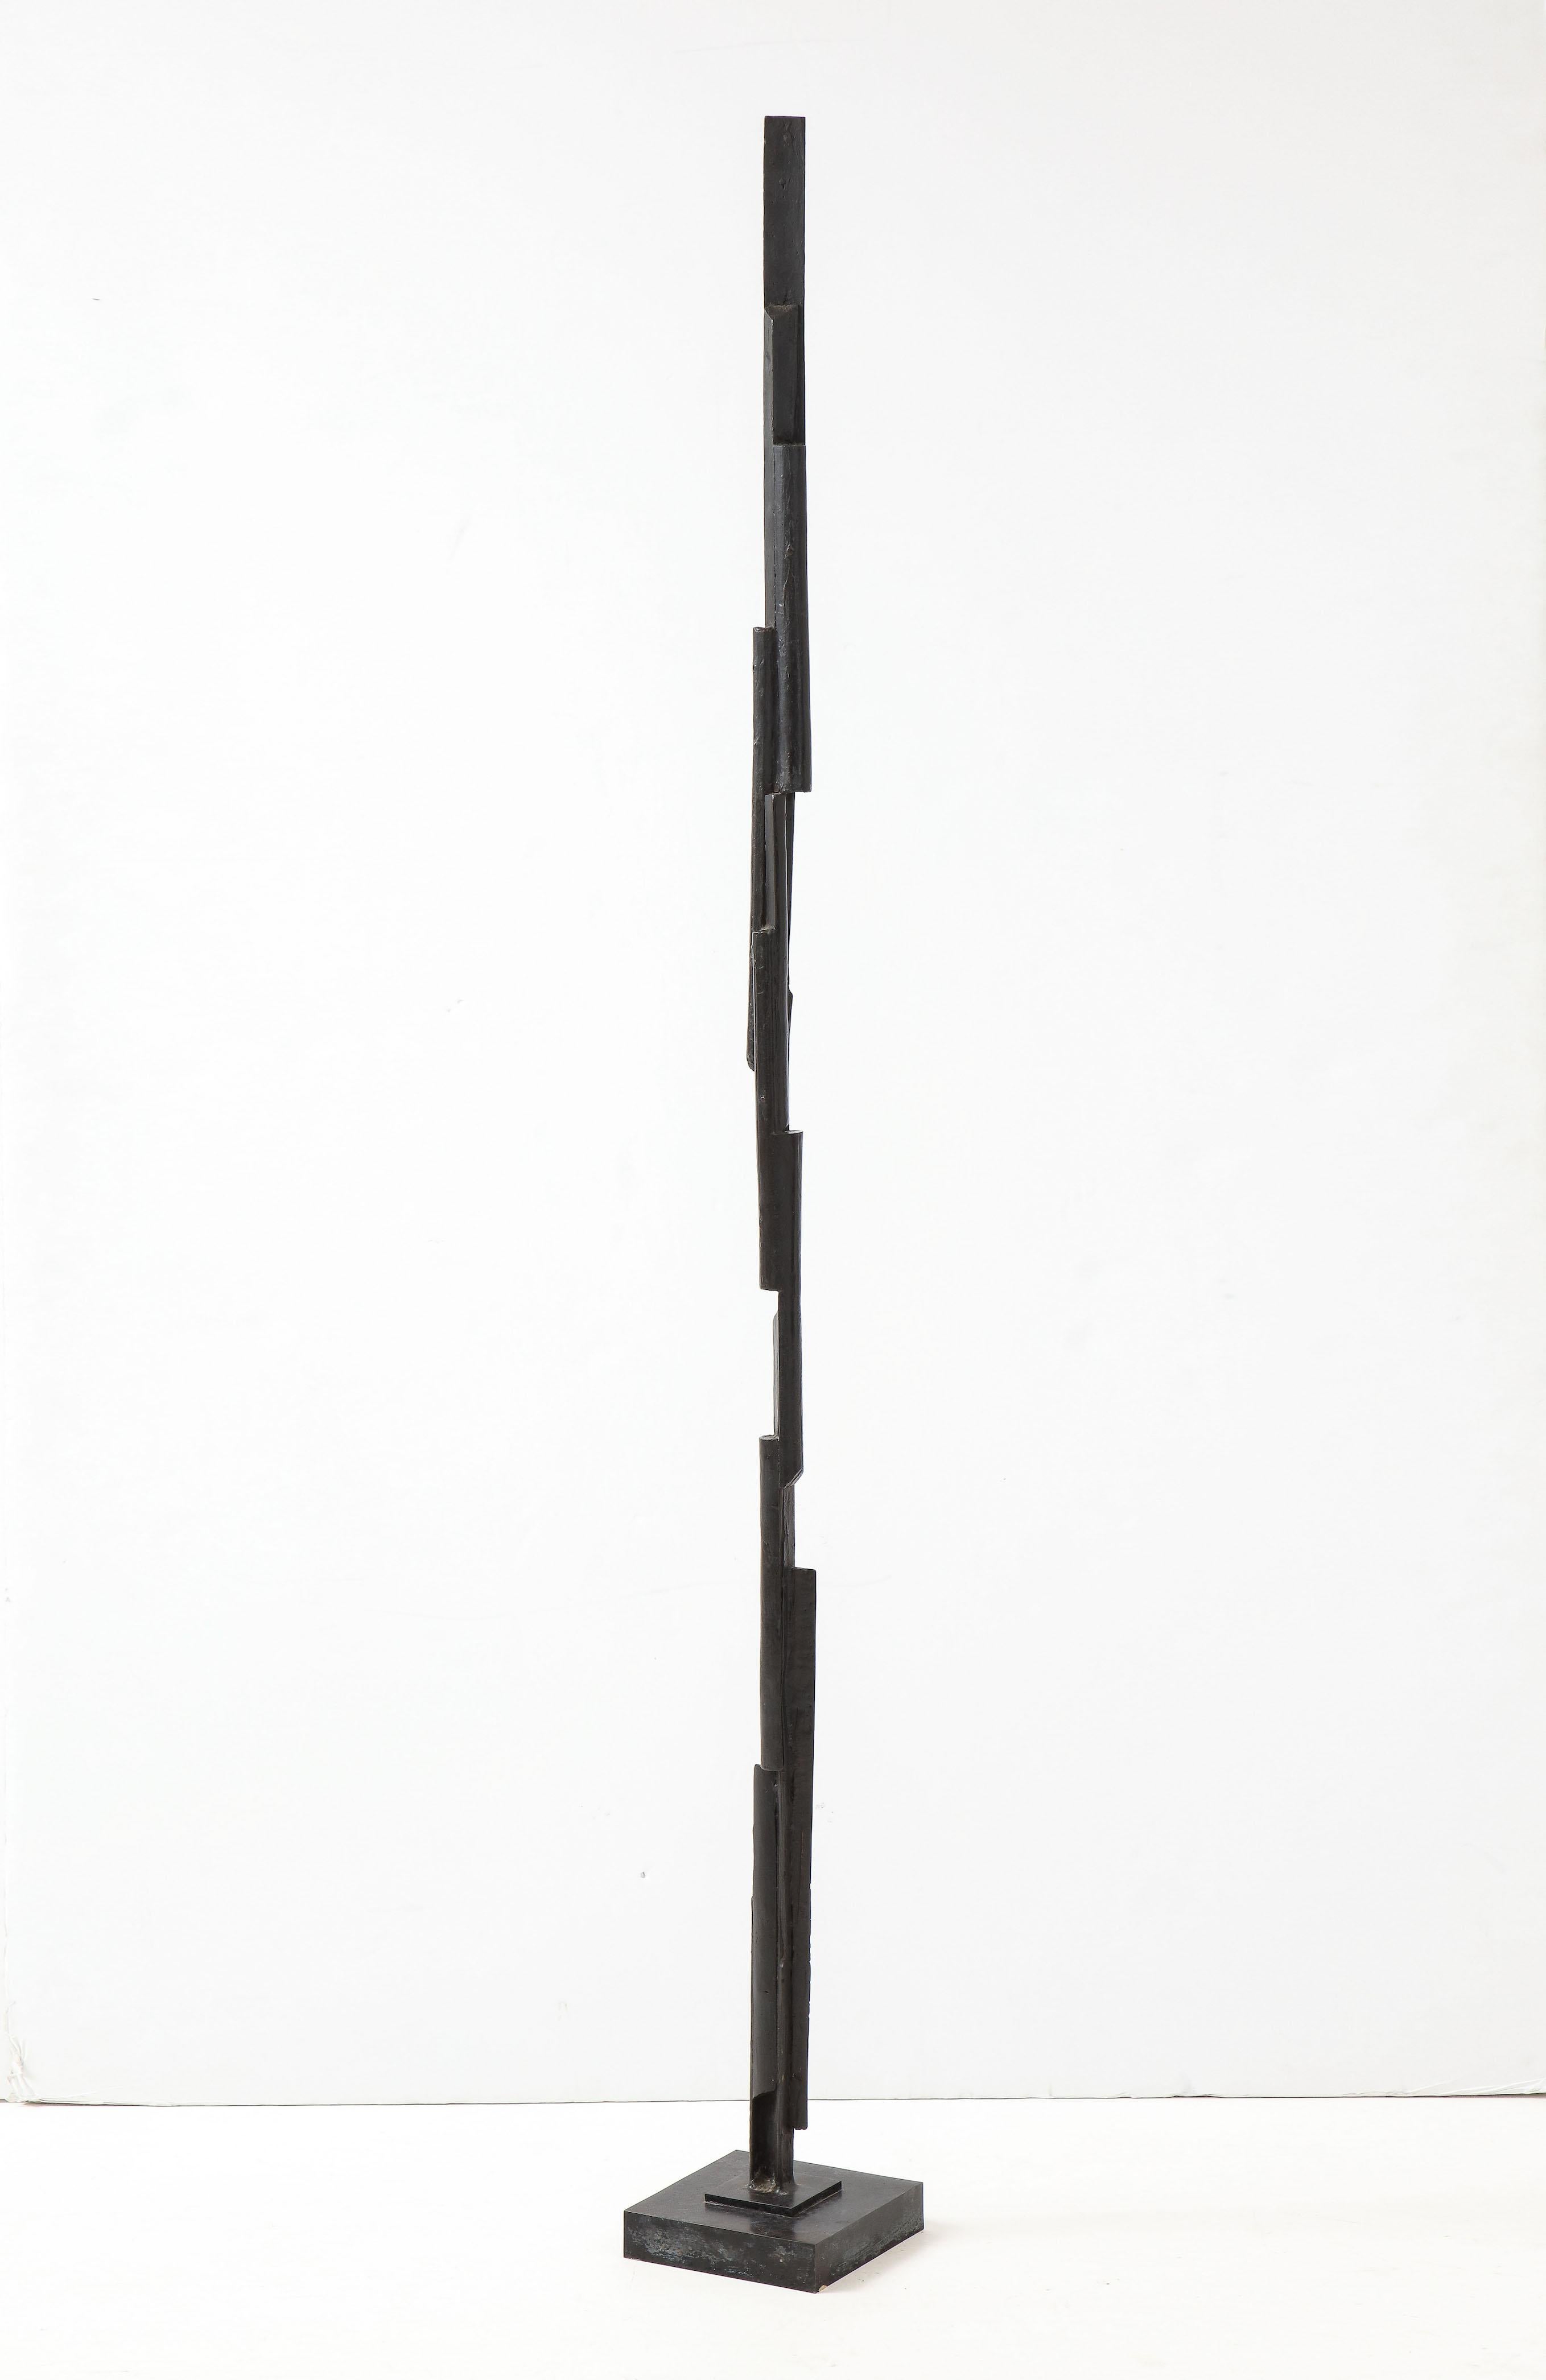 Tall cast and patinated bronze abstract sculpture in the brutalist style .
USA, C. 2005
